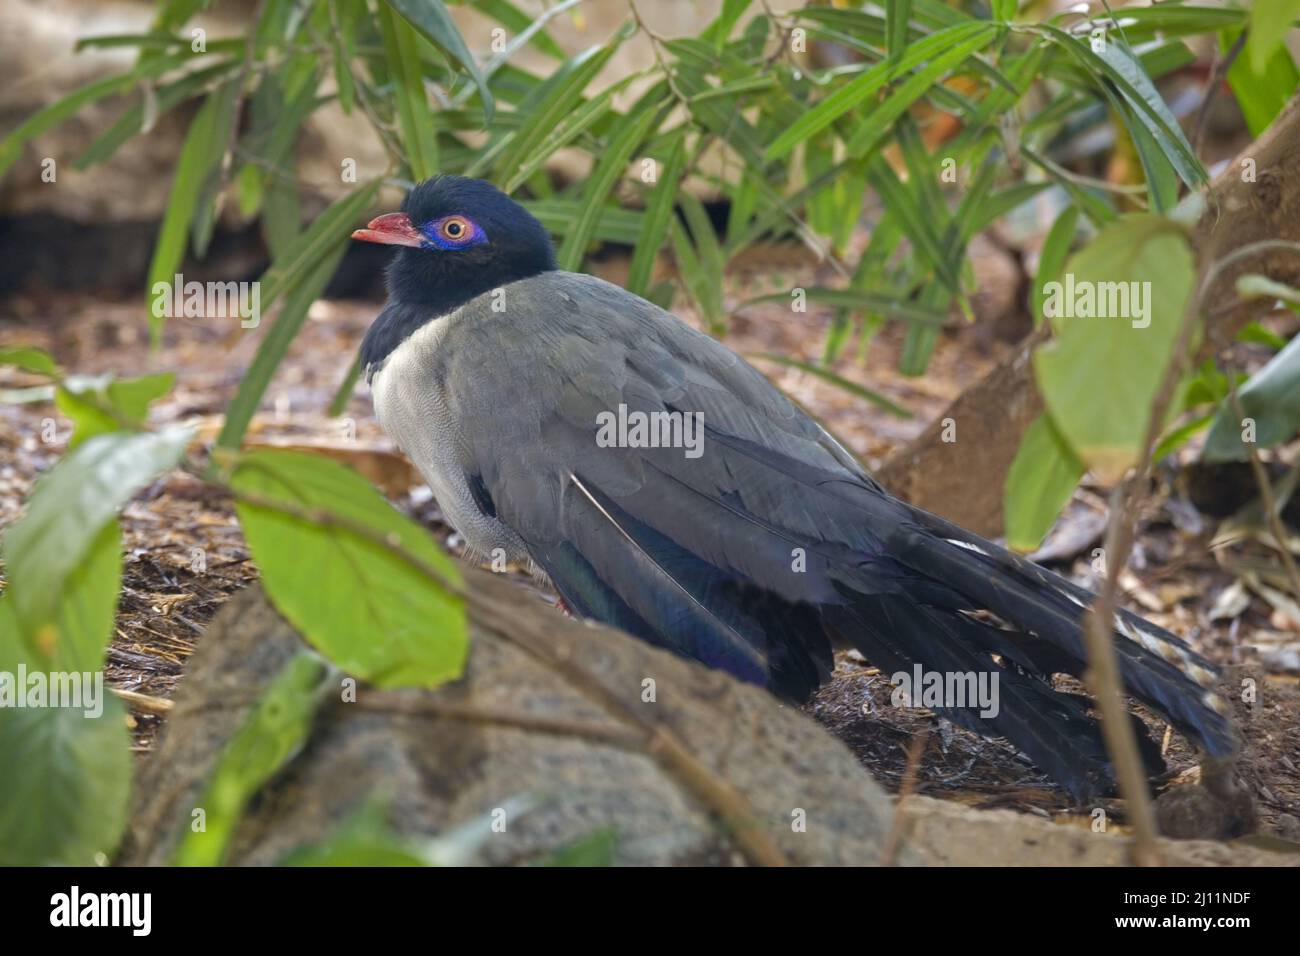 A Coral-billed or Renauld's Ground Cuckoo, Carpococcyx renauldi, relaxing Stock Photo